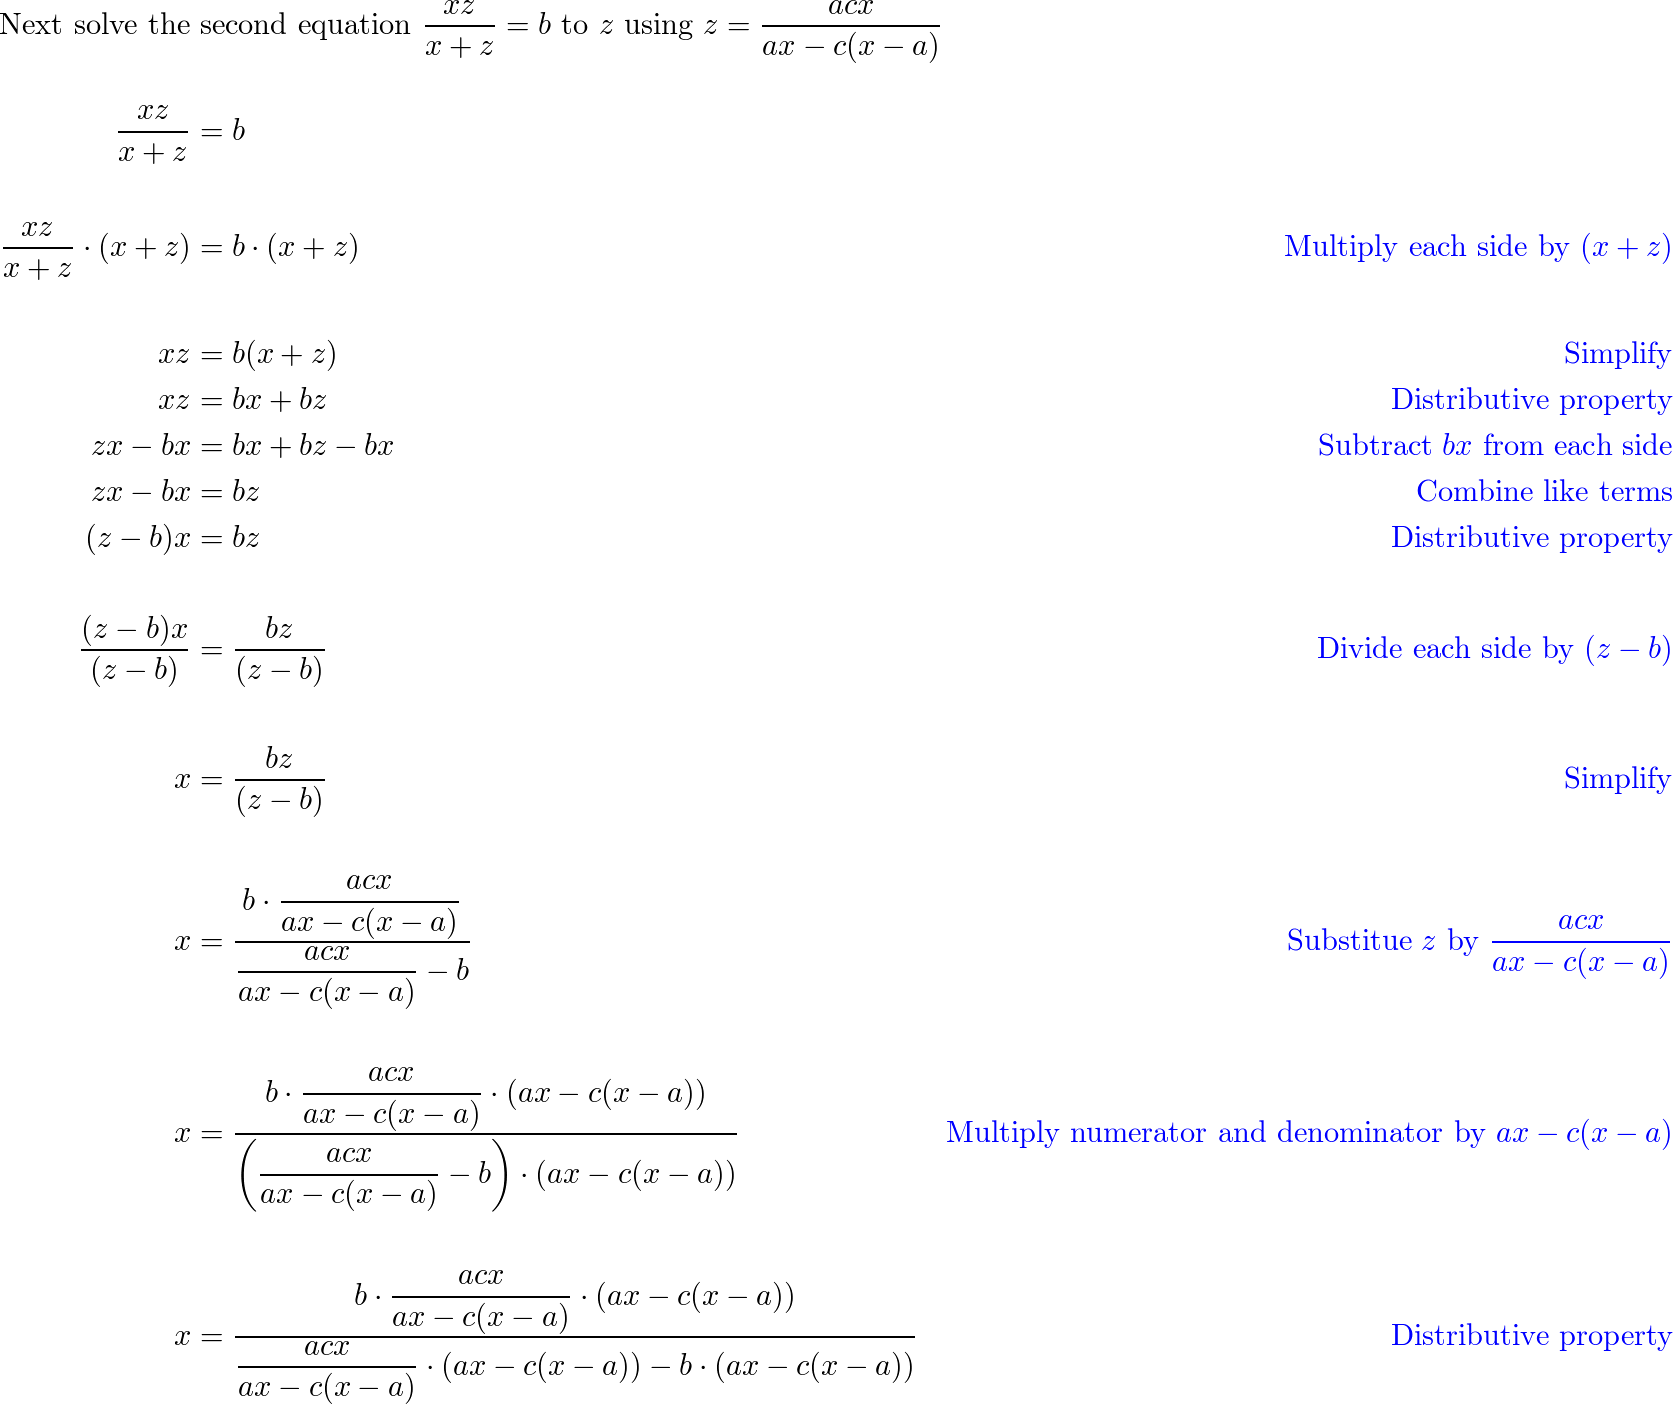 Solved Let x,y,zx,y,z be (non-zero) vectors and suppose